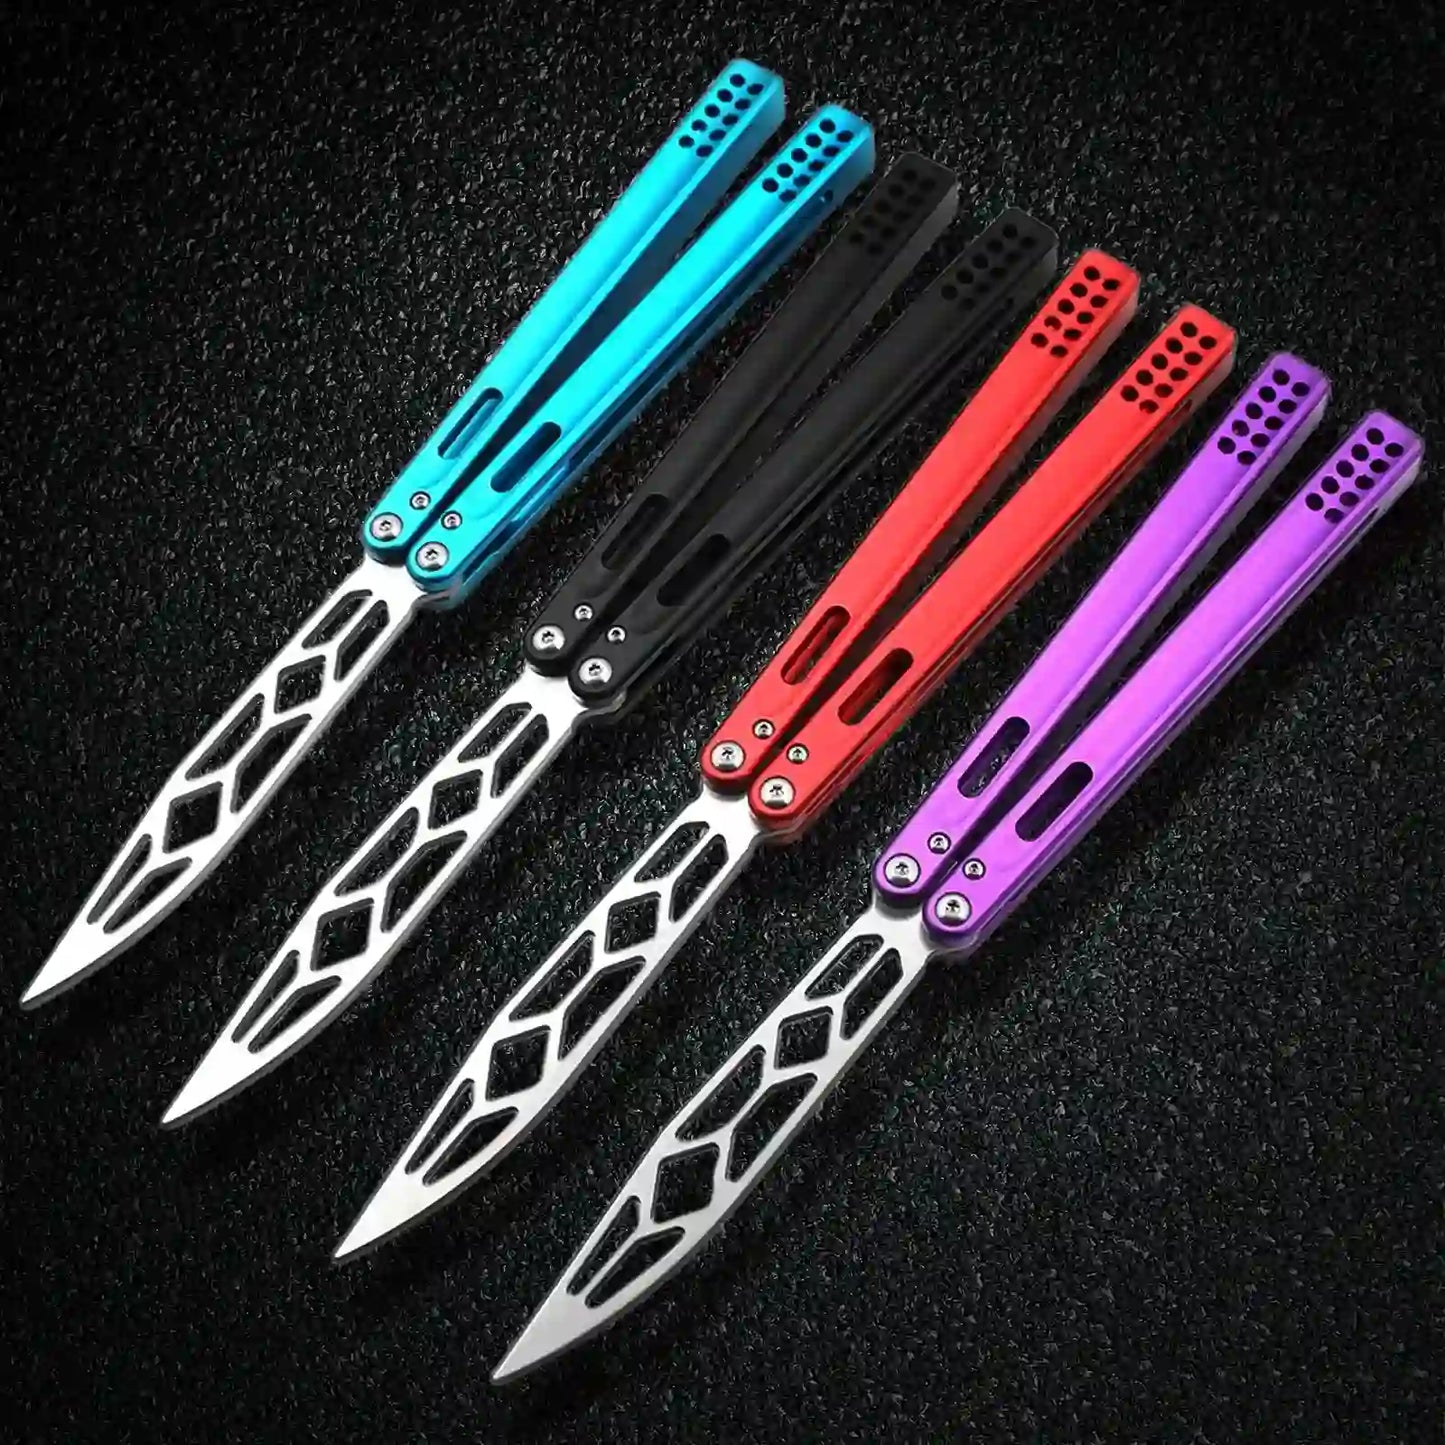 Andux Balisong Butterfly Knife CNC 6061 Aluminum Handle Effective Bushing System Lock Free CNC7